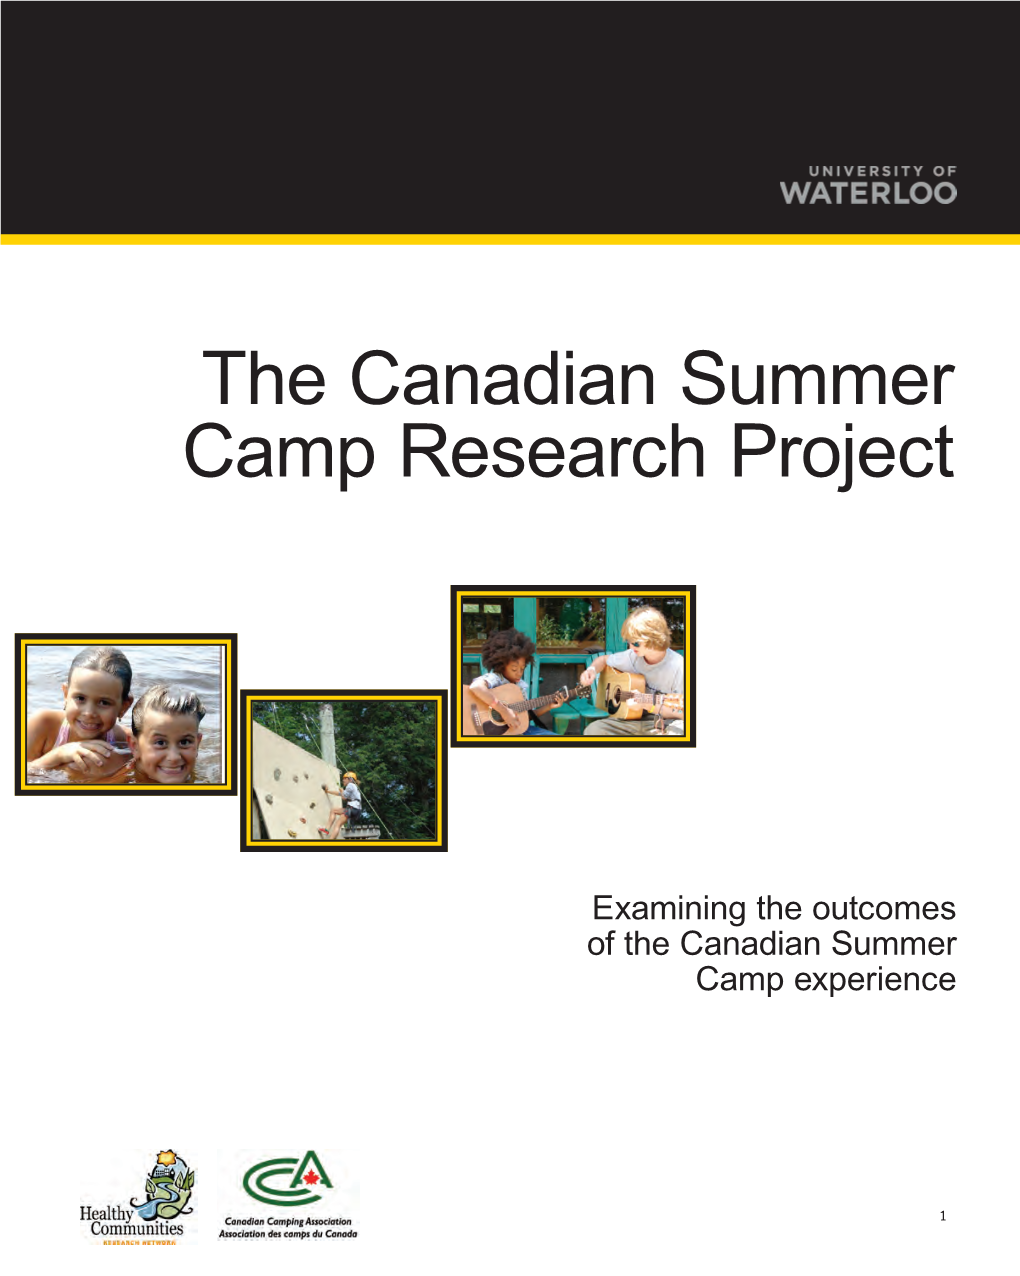 The Canadian Summer Camp Research Project